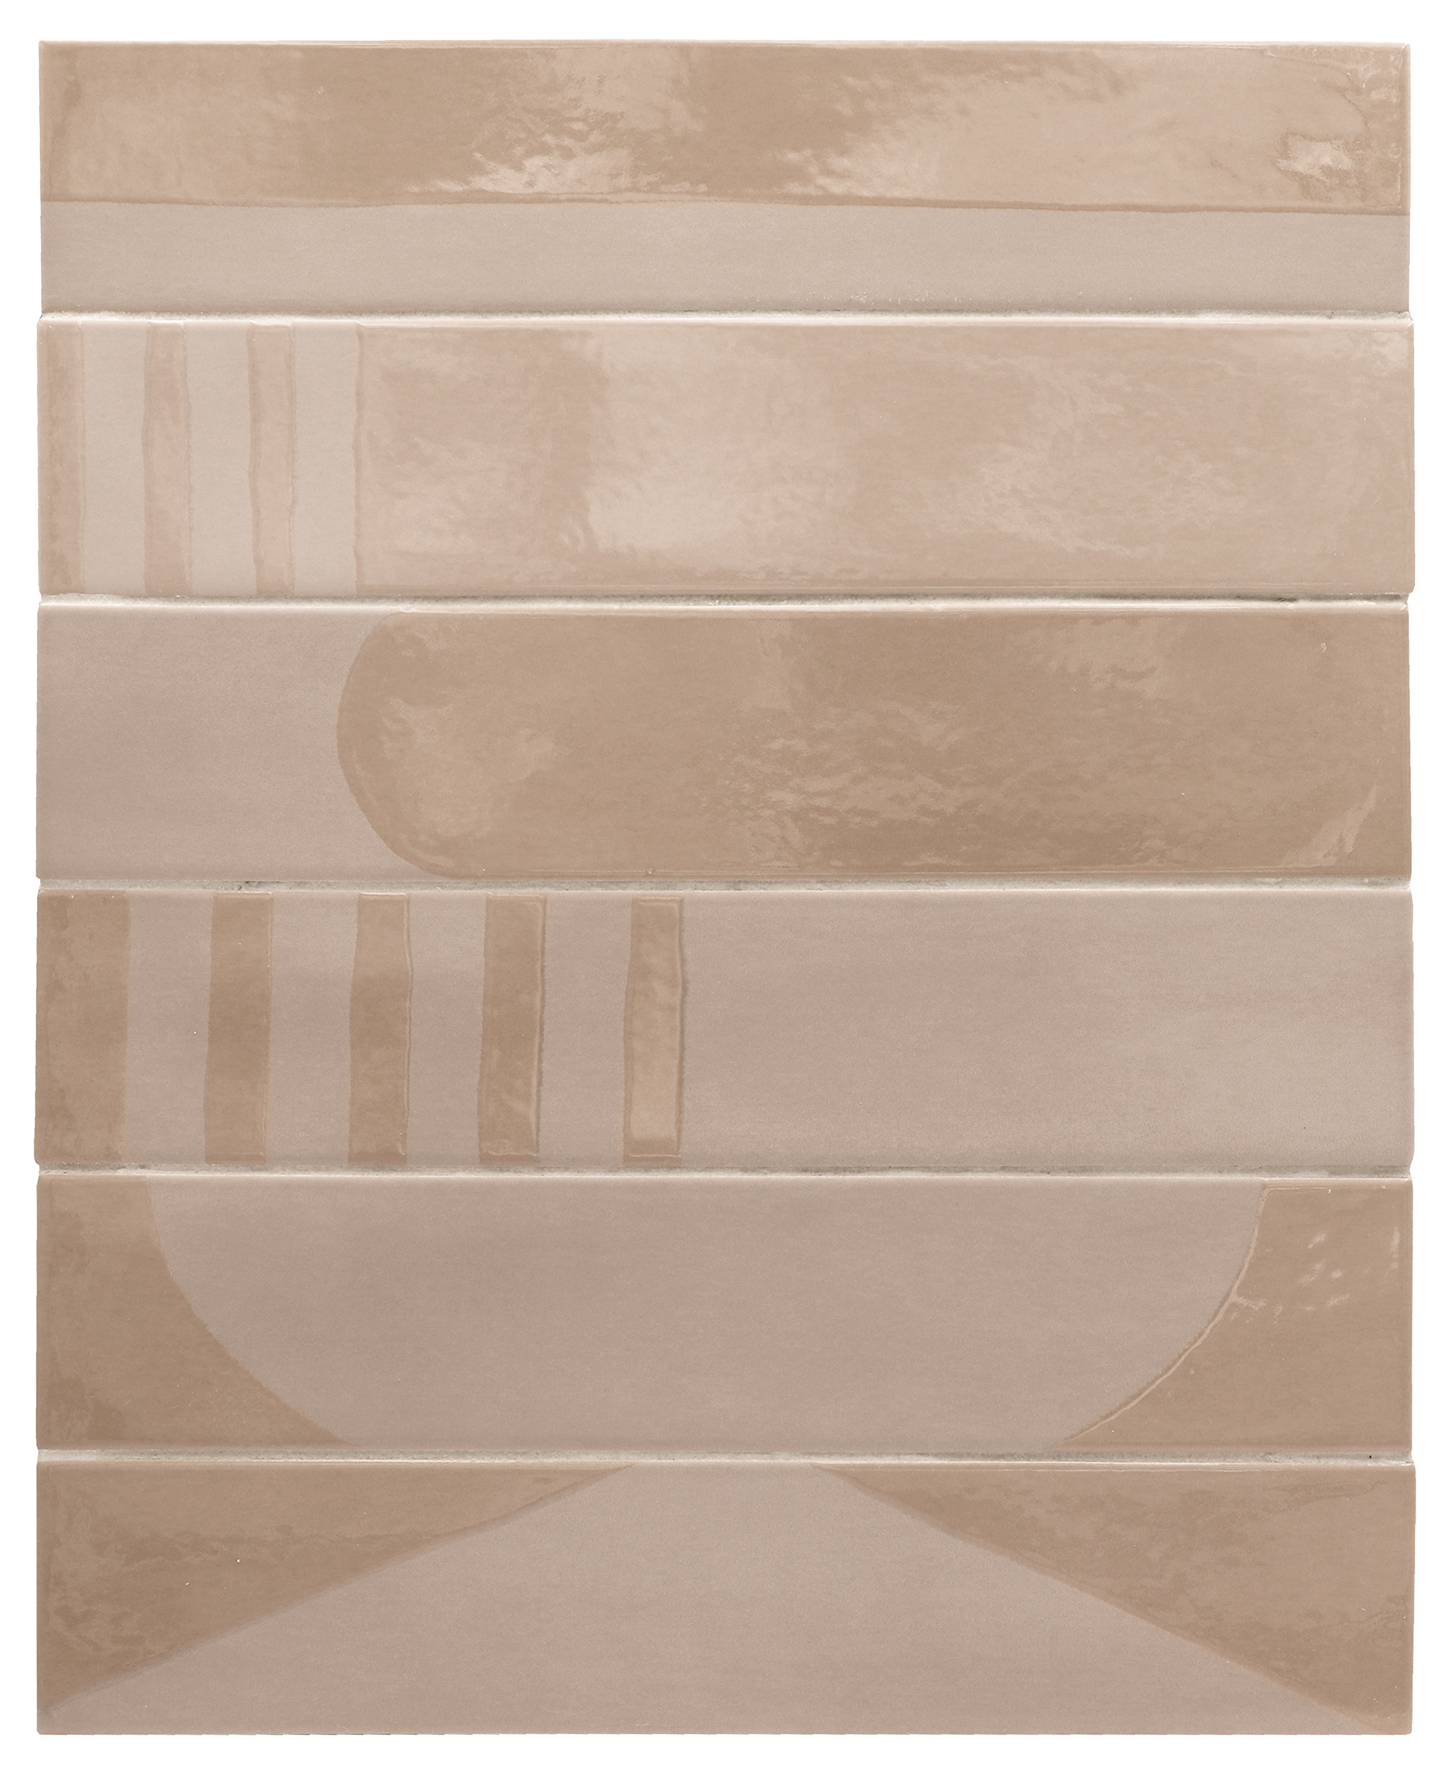 WEISSE DECOR TAUPE 6X30 - 0,5 m²